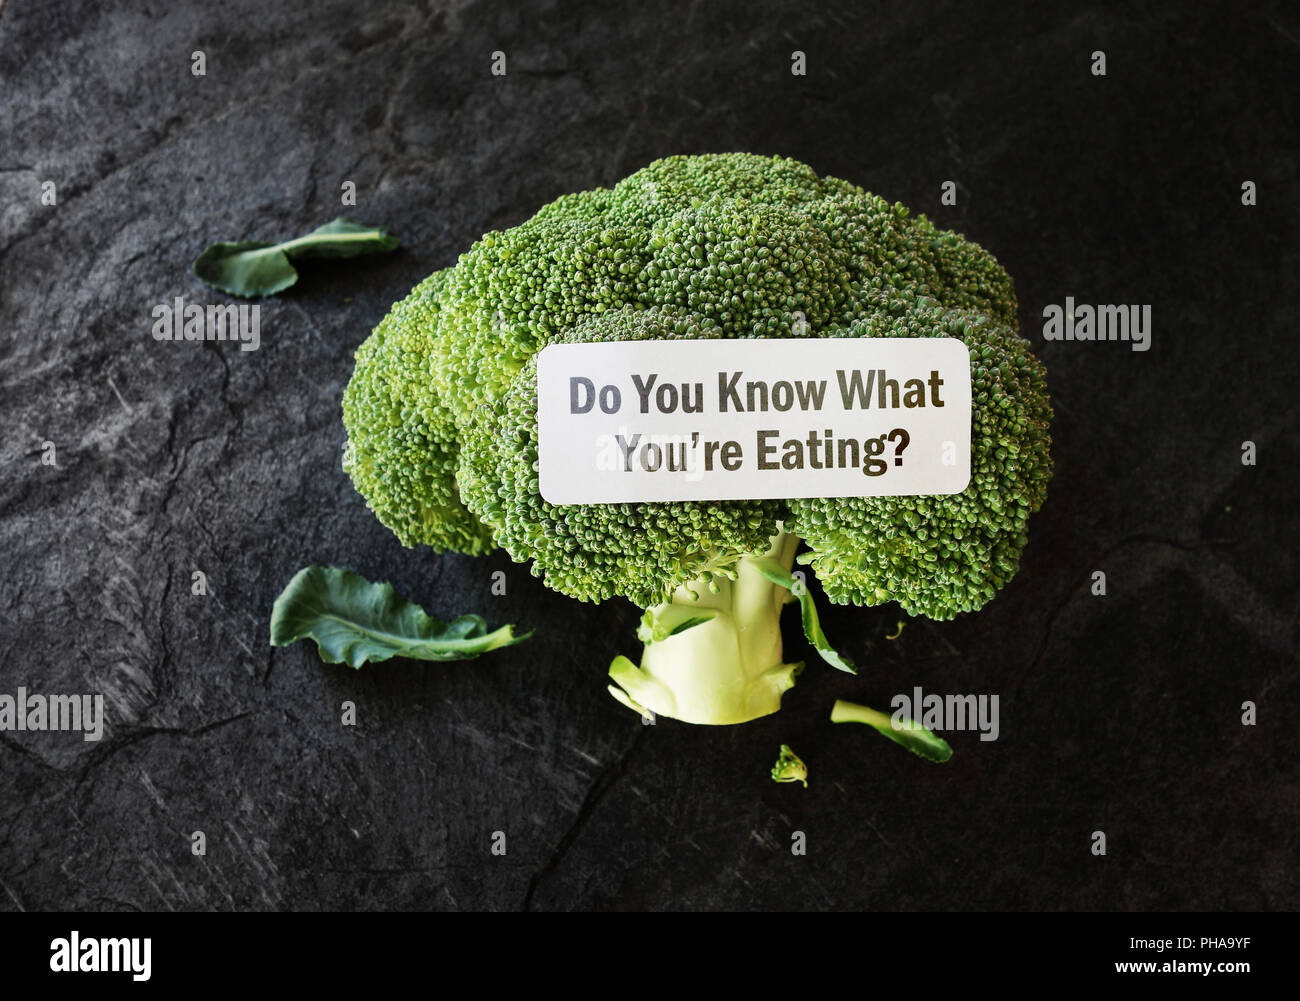 What Youre Eating food label Stock Photo